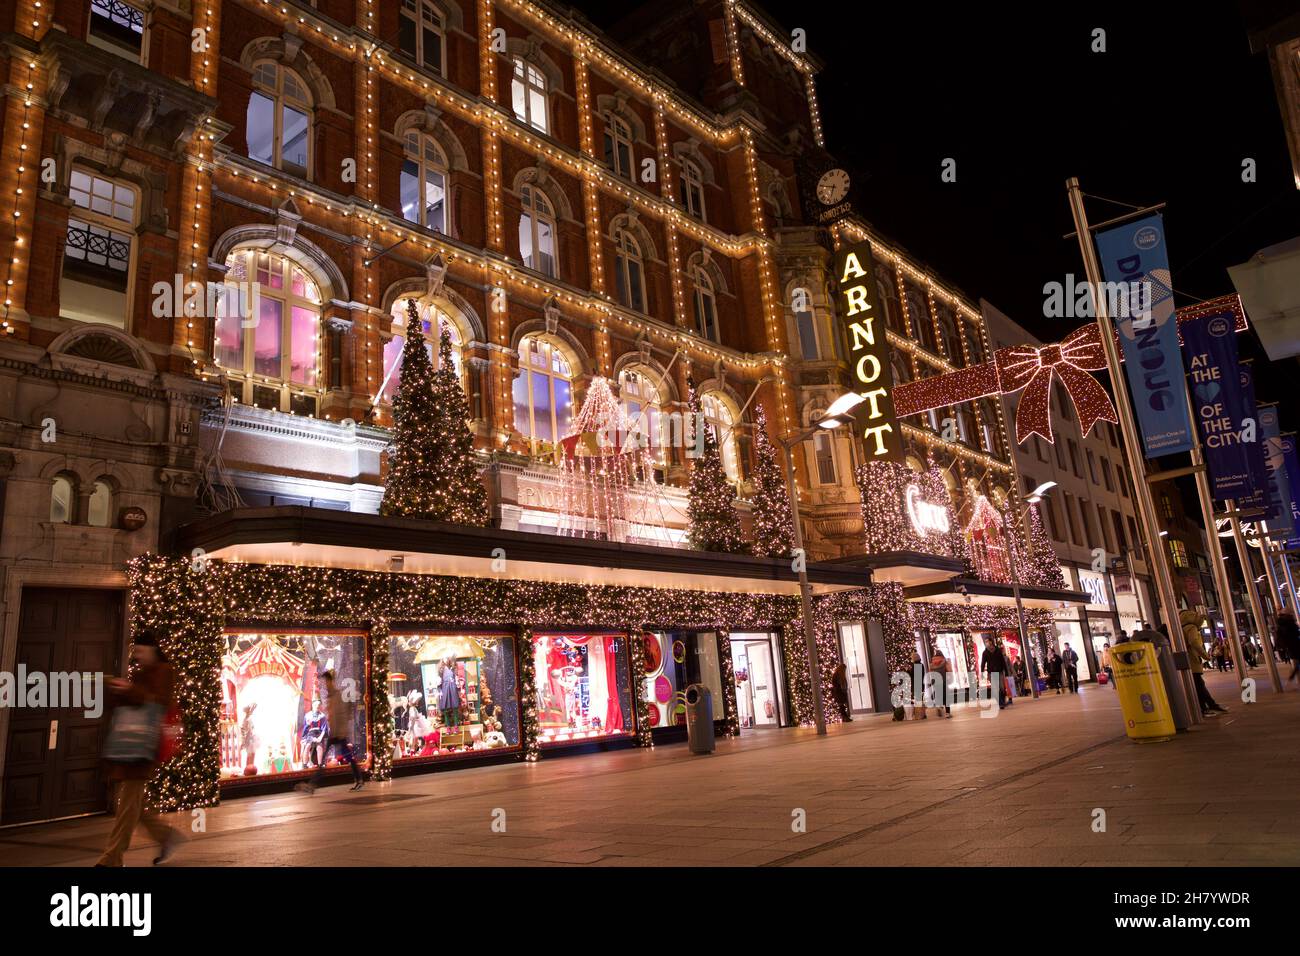 Dublin, Ireland - November 24, 2021: shoppers pass the Christmas lights and decorations at the landmark Arnotts Department Store on Henry Street, the Stock Photo